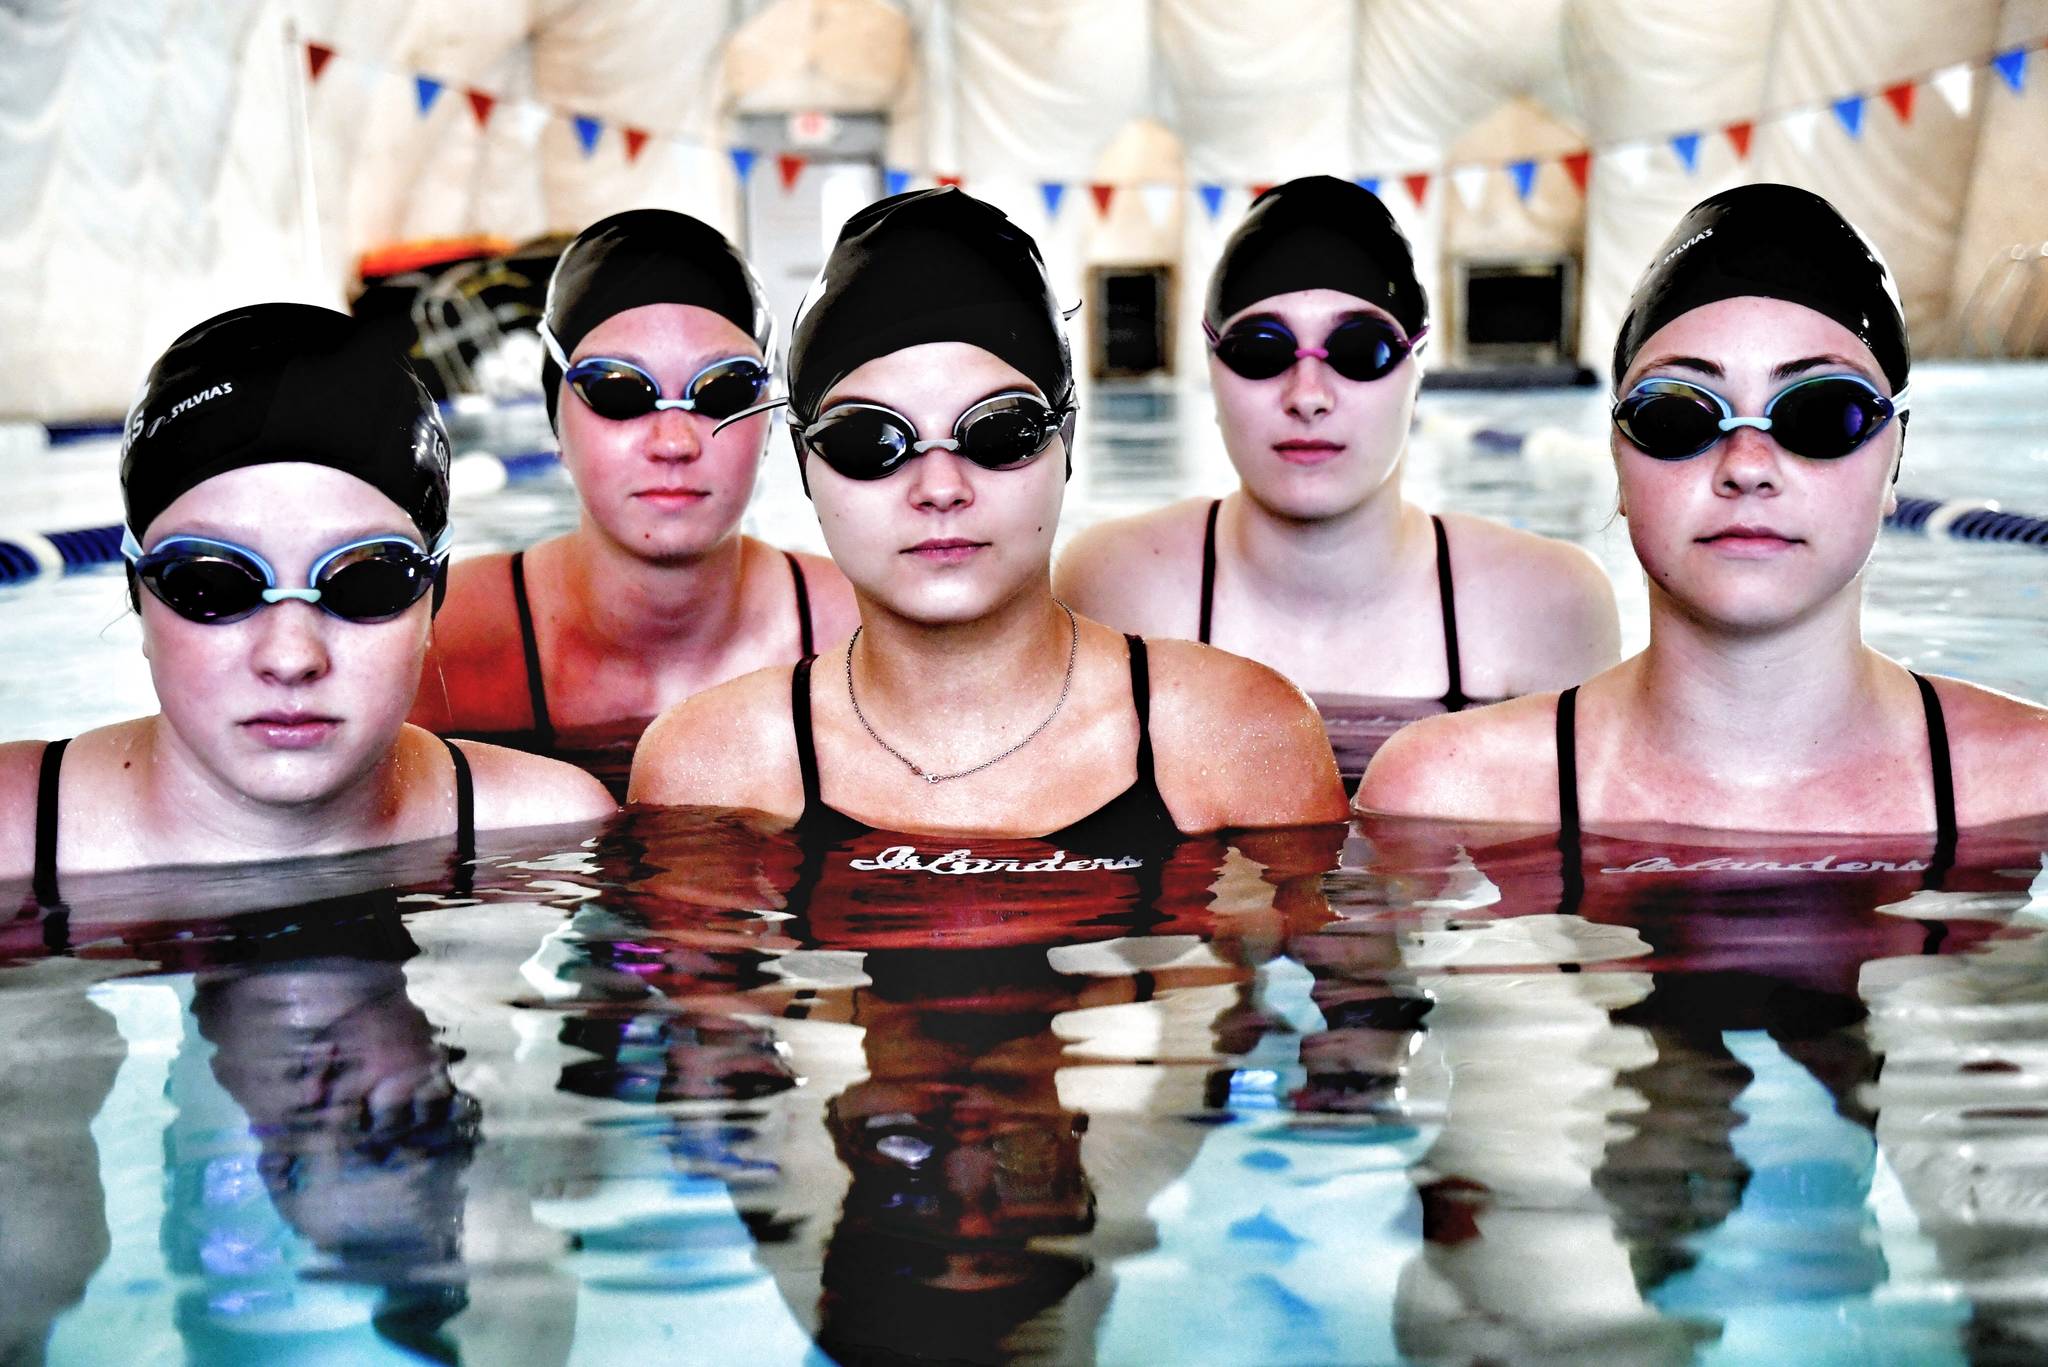 Chauntelle Johnson returns as head coach for the Mercer Island High School girls swim and dive team this season. Johnson was head coach for both the MIHS girls and boys teams several years ago when she helped the girls team to five state titles and the boys team to three state titles. The girls captains this year are (pictured): Ellie Bailey, Kate Hamilton, Grace Olsen and Hailey Vandenbosch for swim, and Sophie McGuffin for the diving group. Photo courtesy of Allison Nelson